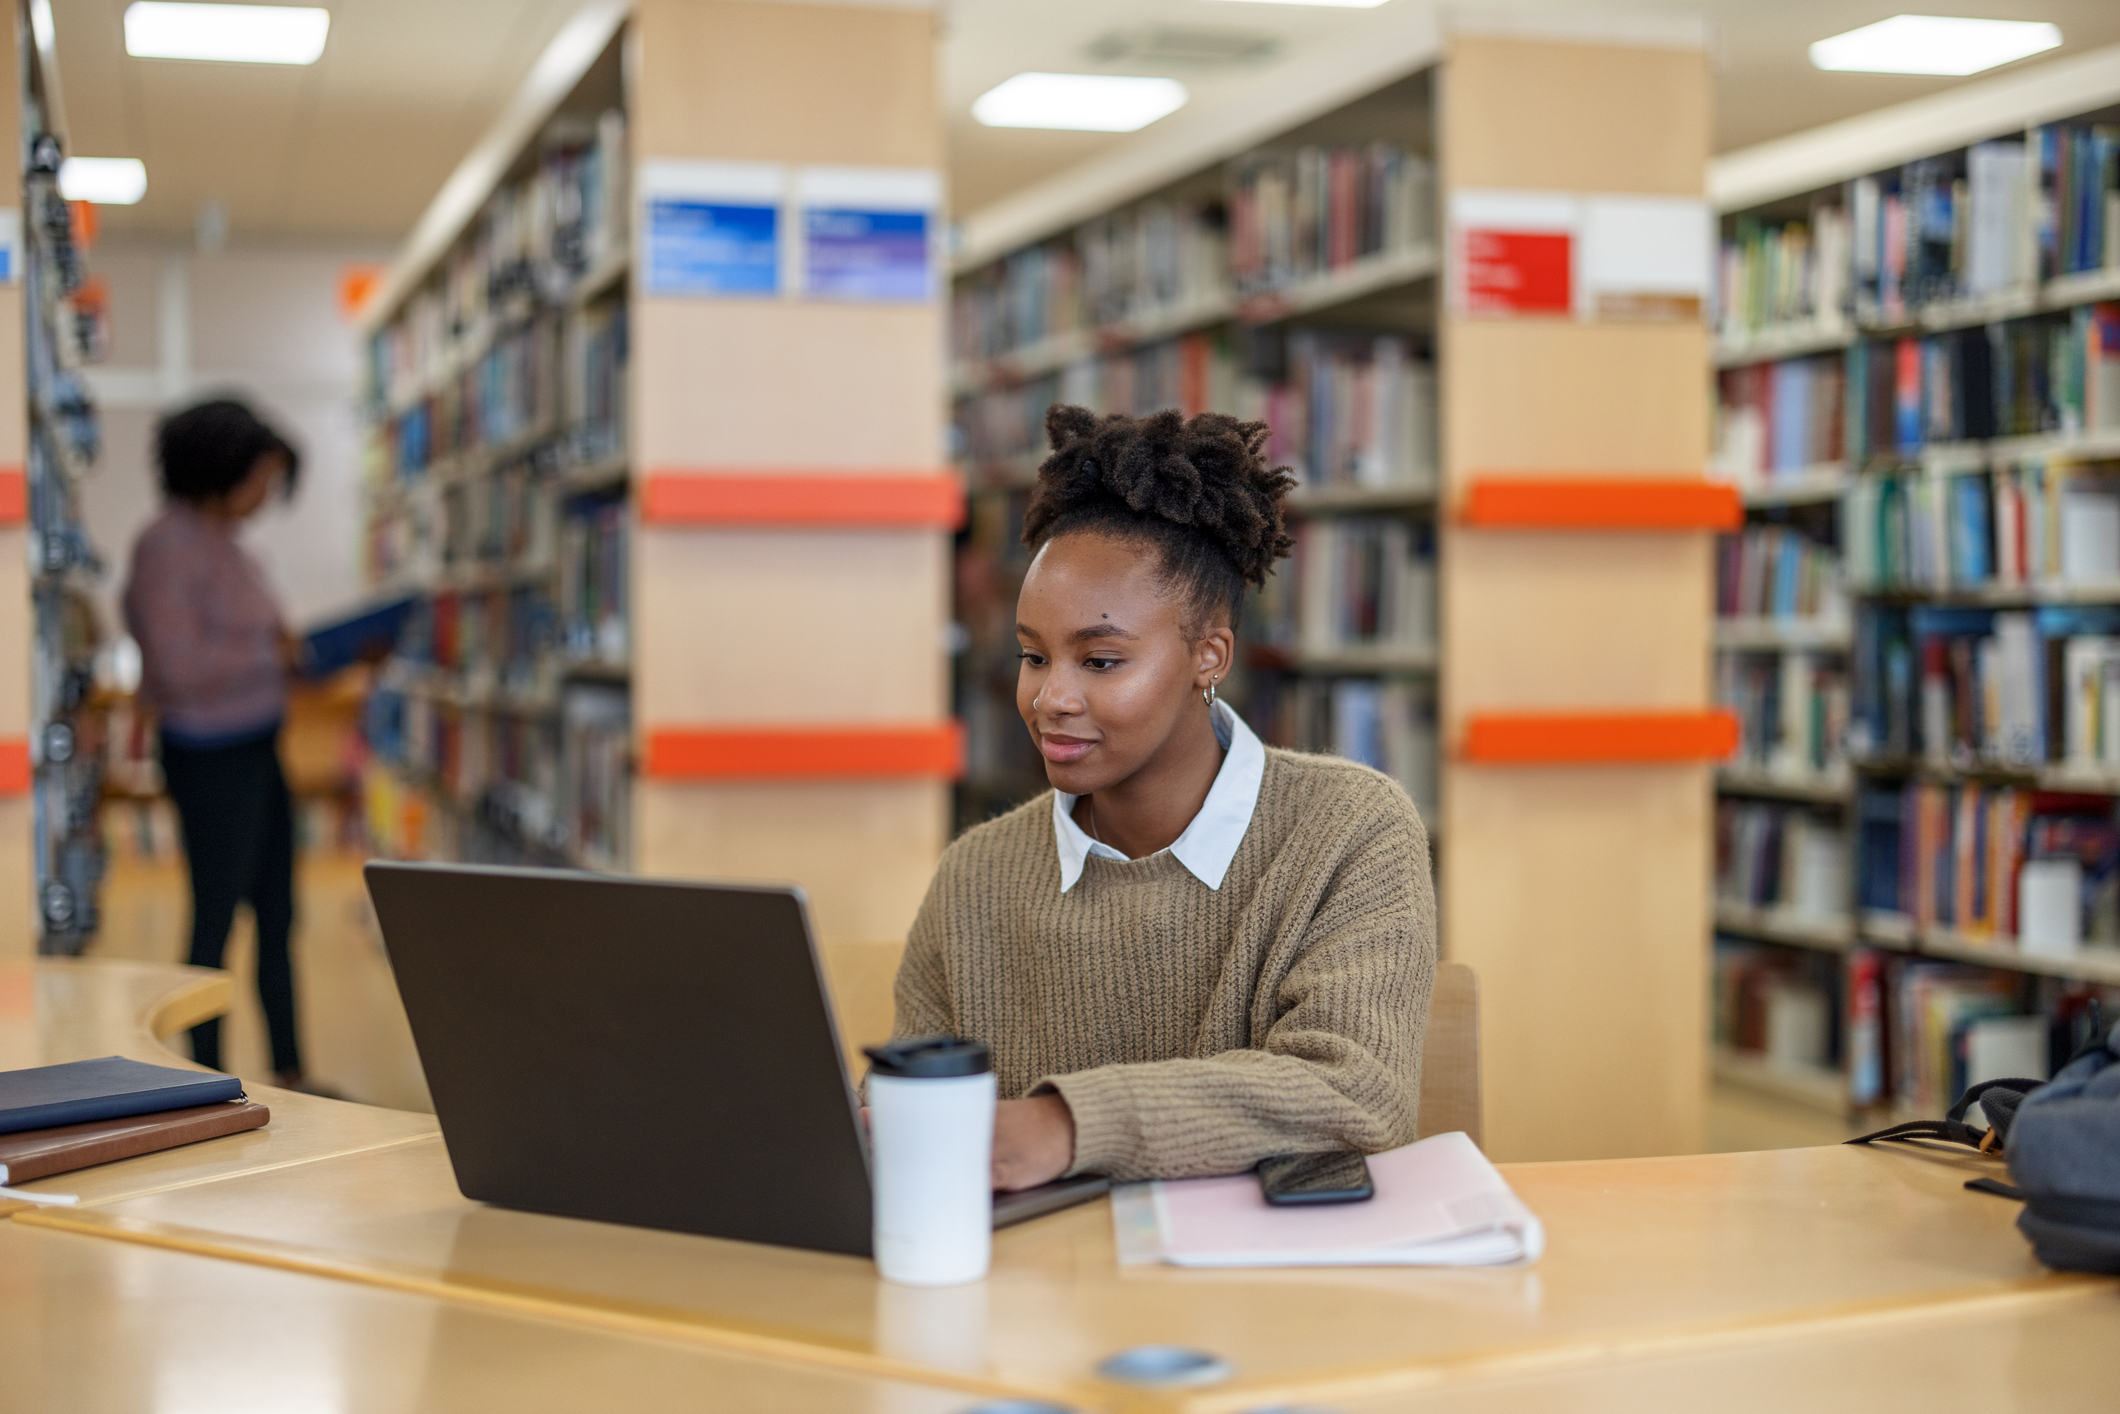 Morgan State University Receives $1.05M Grant To Prepare Its 'Students To Be At The Forefront Of The FinTech Revolution'